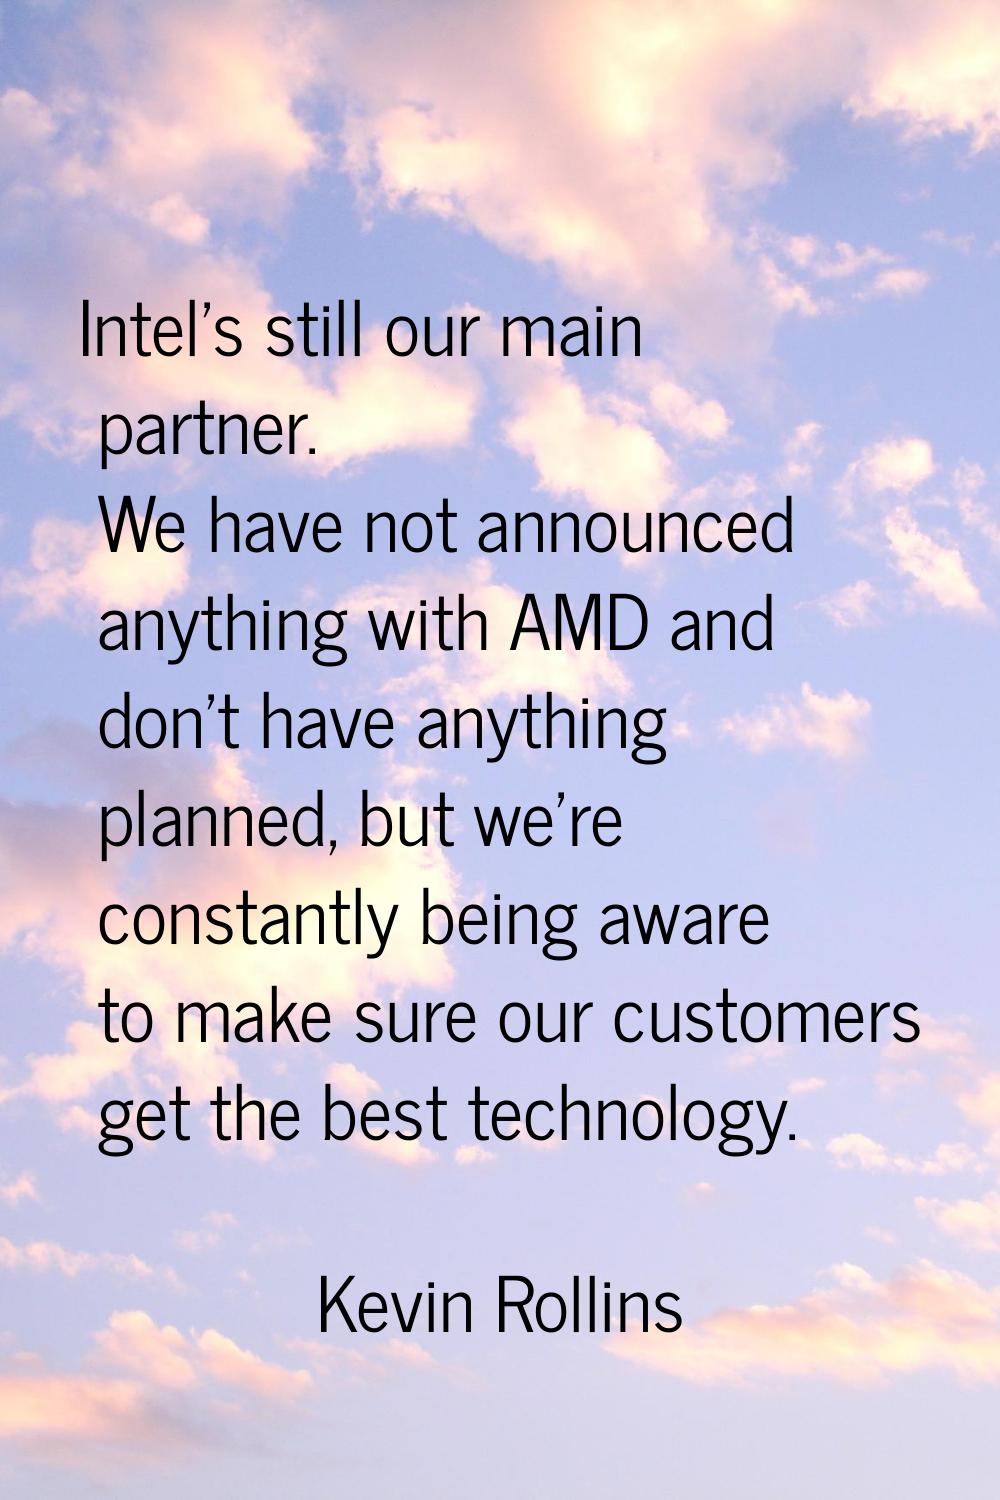 Intel's still our main partner. We have not announced anything with AMD and don't have anything pla